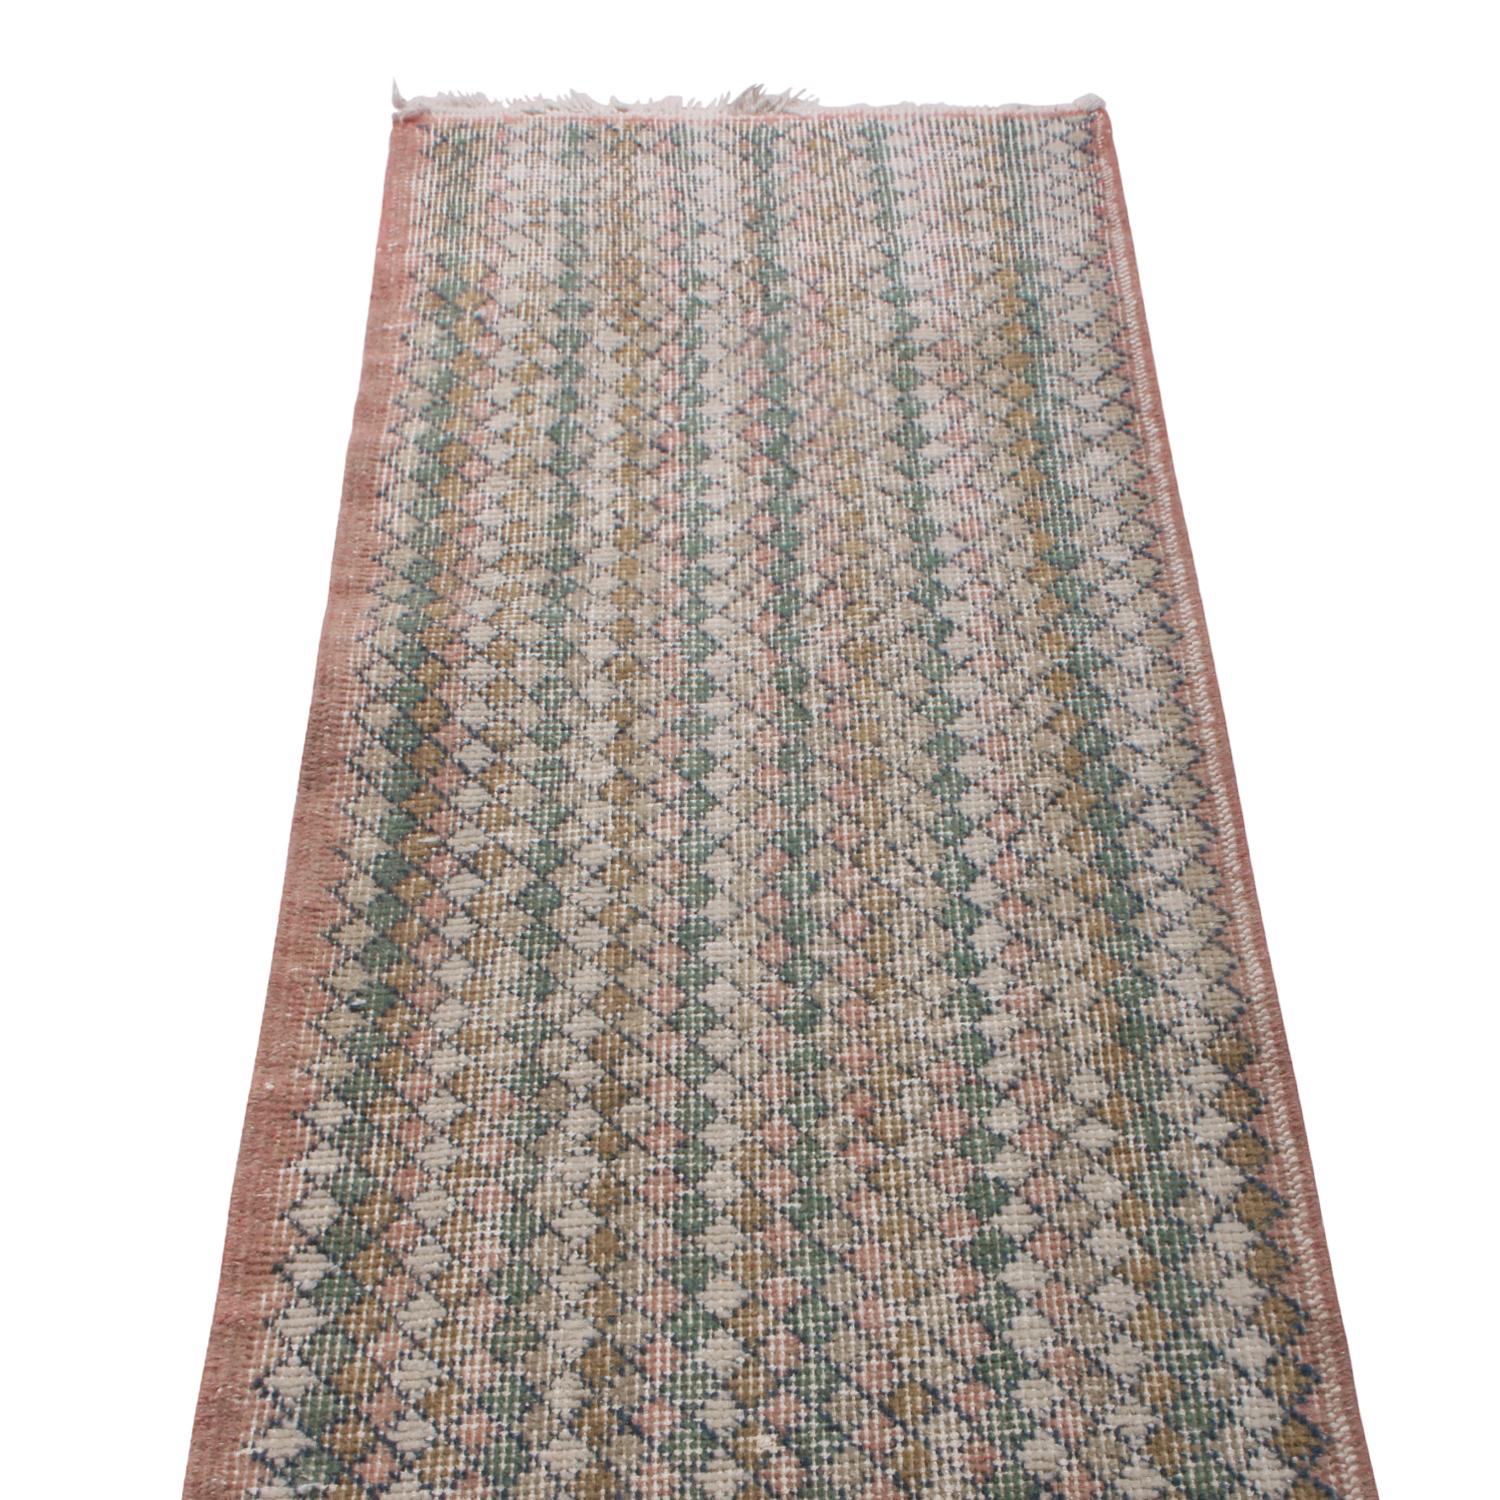 Hand knotted in Turkey originating between 1960-1970, this vintage midcentury wool runner is the latest to join our midcentury Pasha collection, celebrating Turkish icon and multidisciplinary designer Zeki Müren with our team’s hand picked favorites